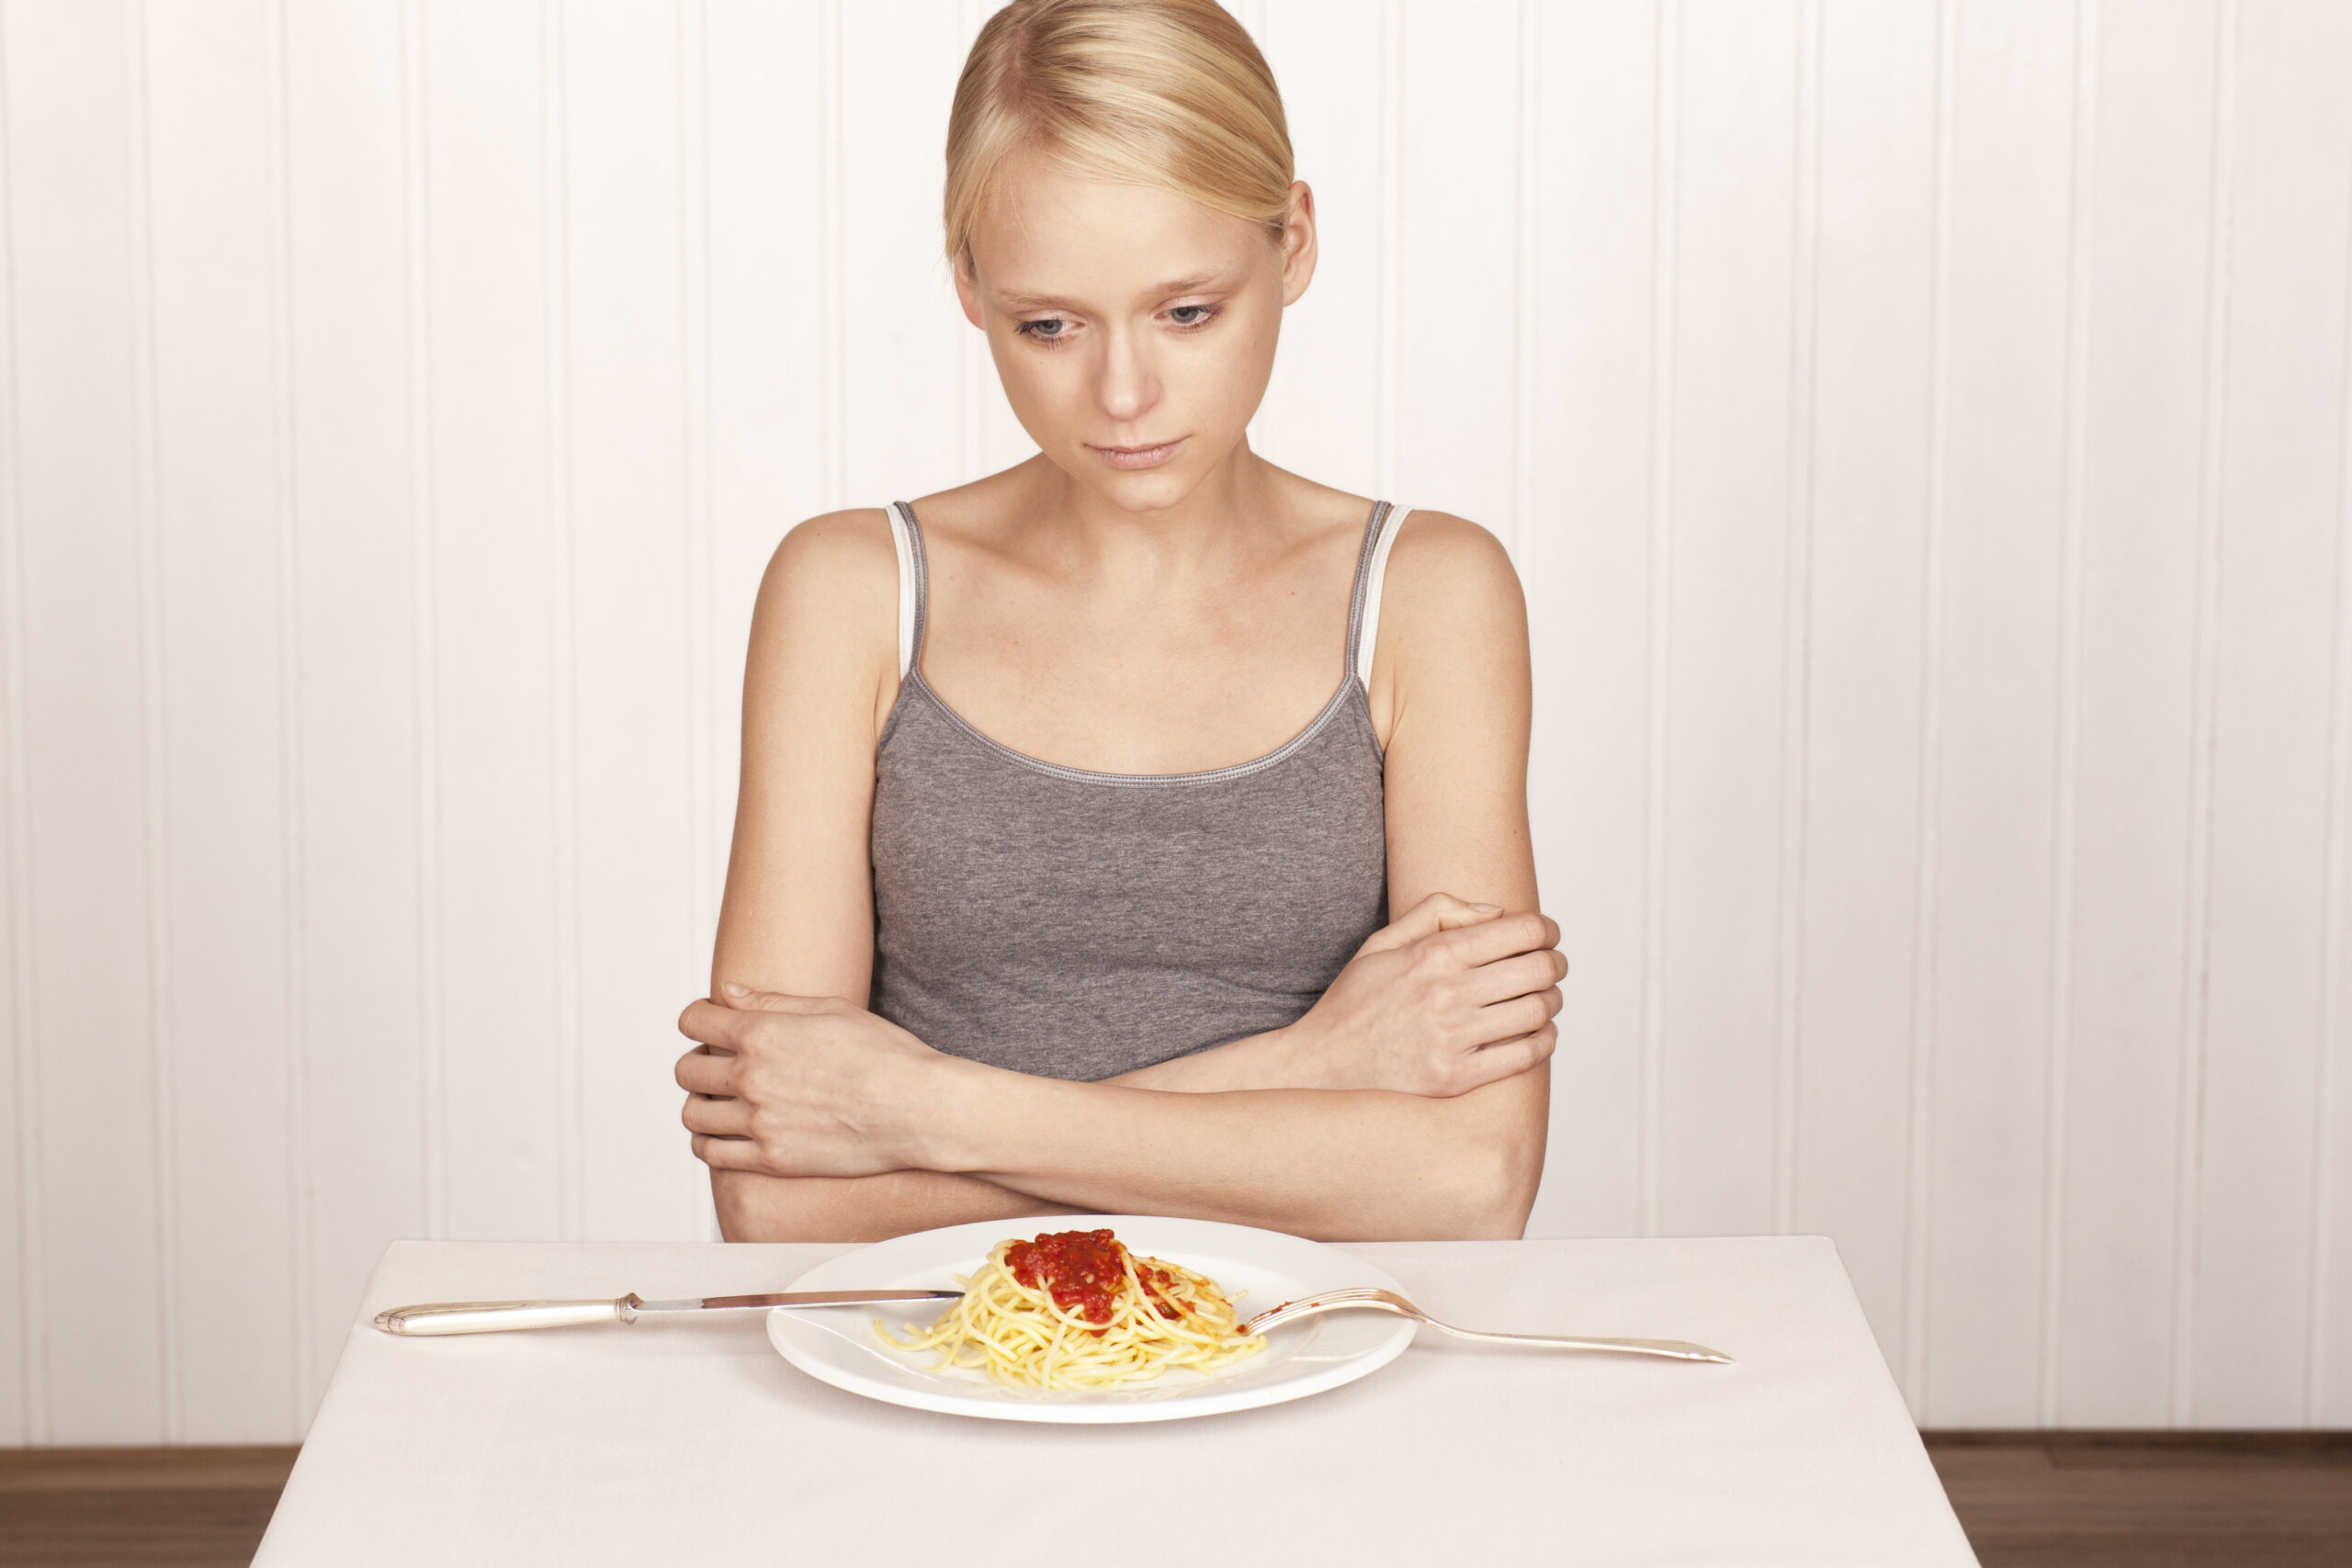 Increased risk of anorexia in early risers